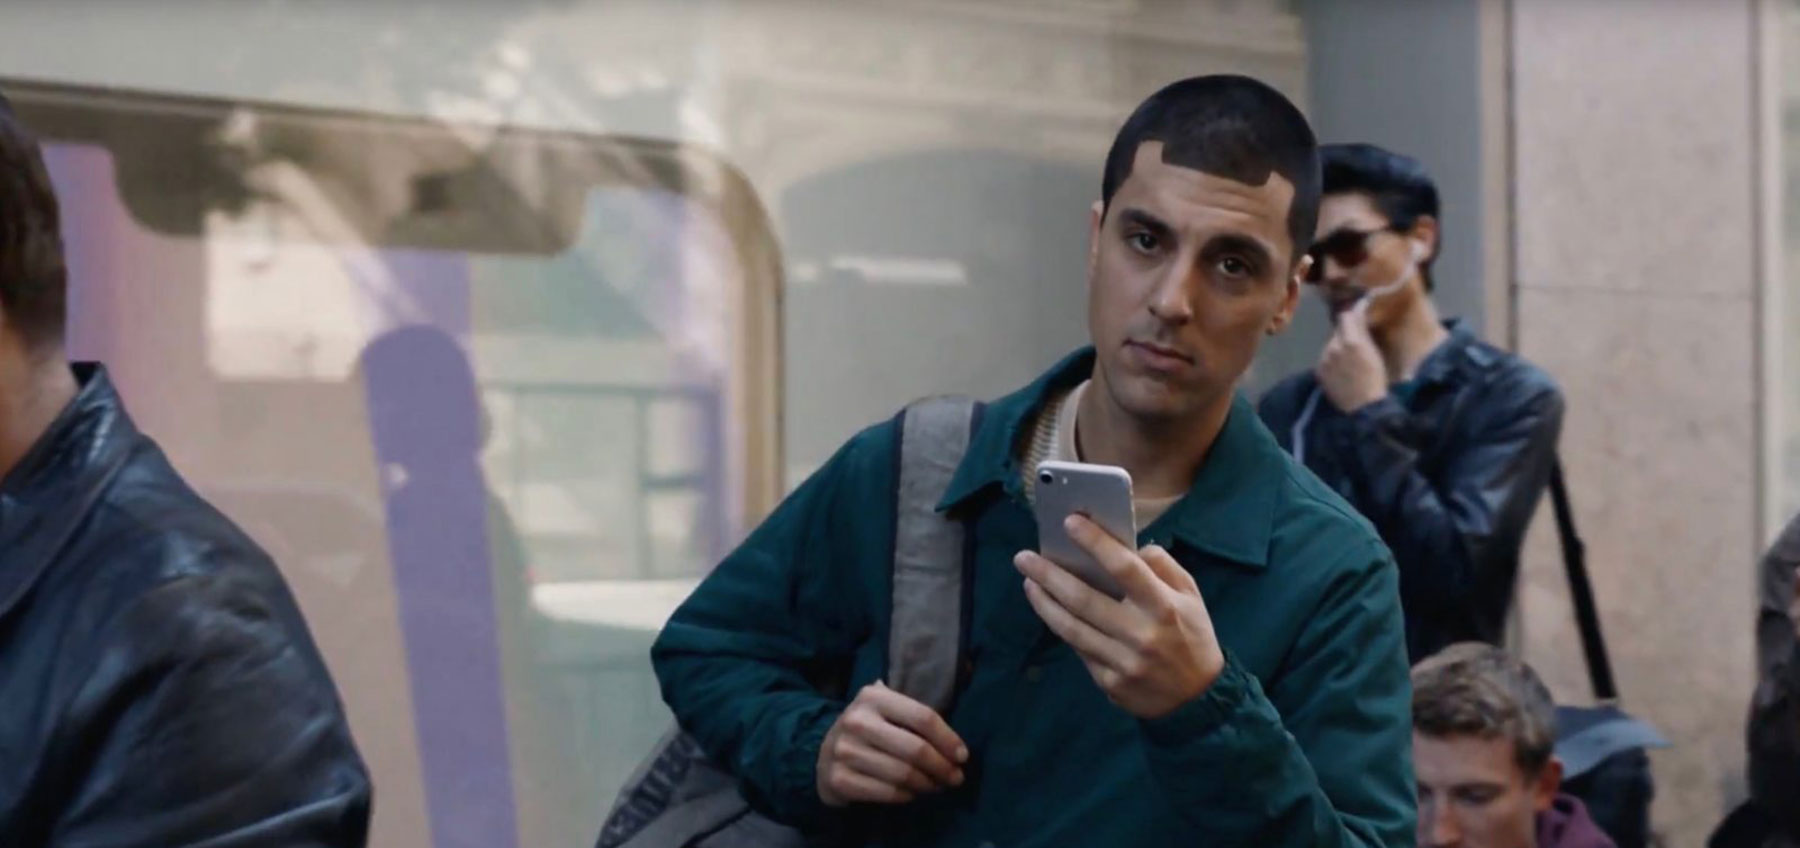 New Samsung Advertisement Urges iPhone Users to “Grow Up”